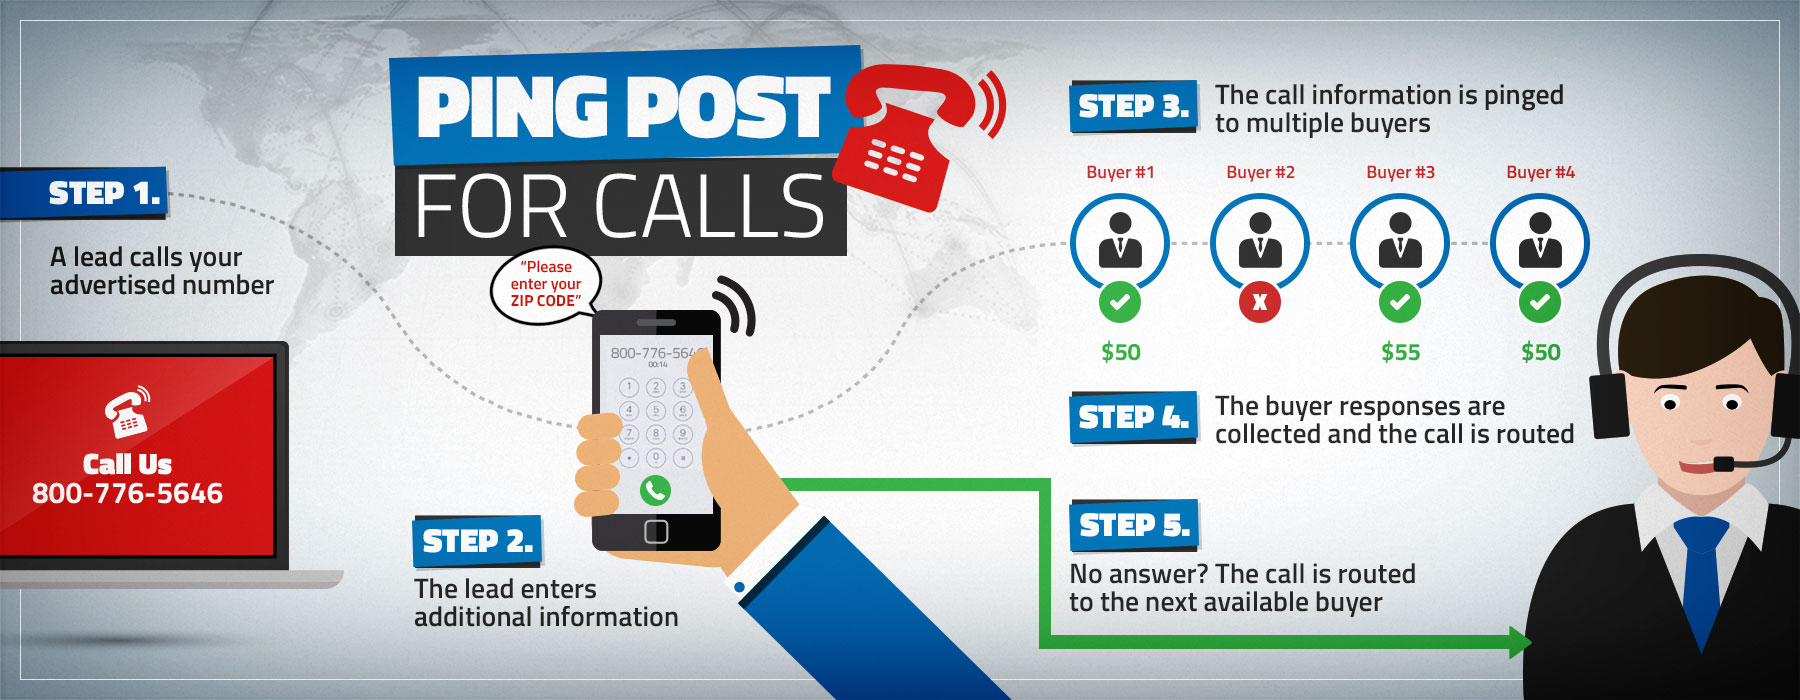 ping post for calls